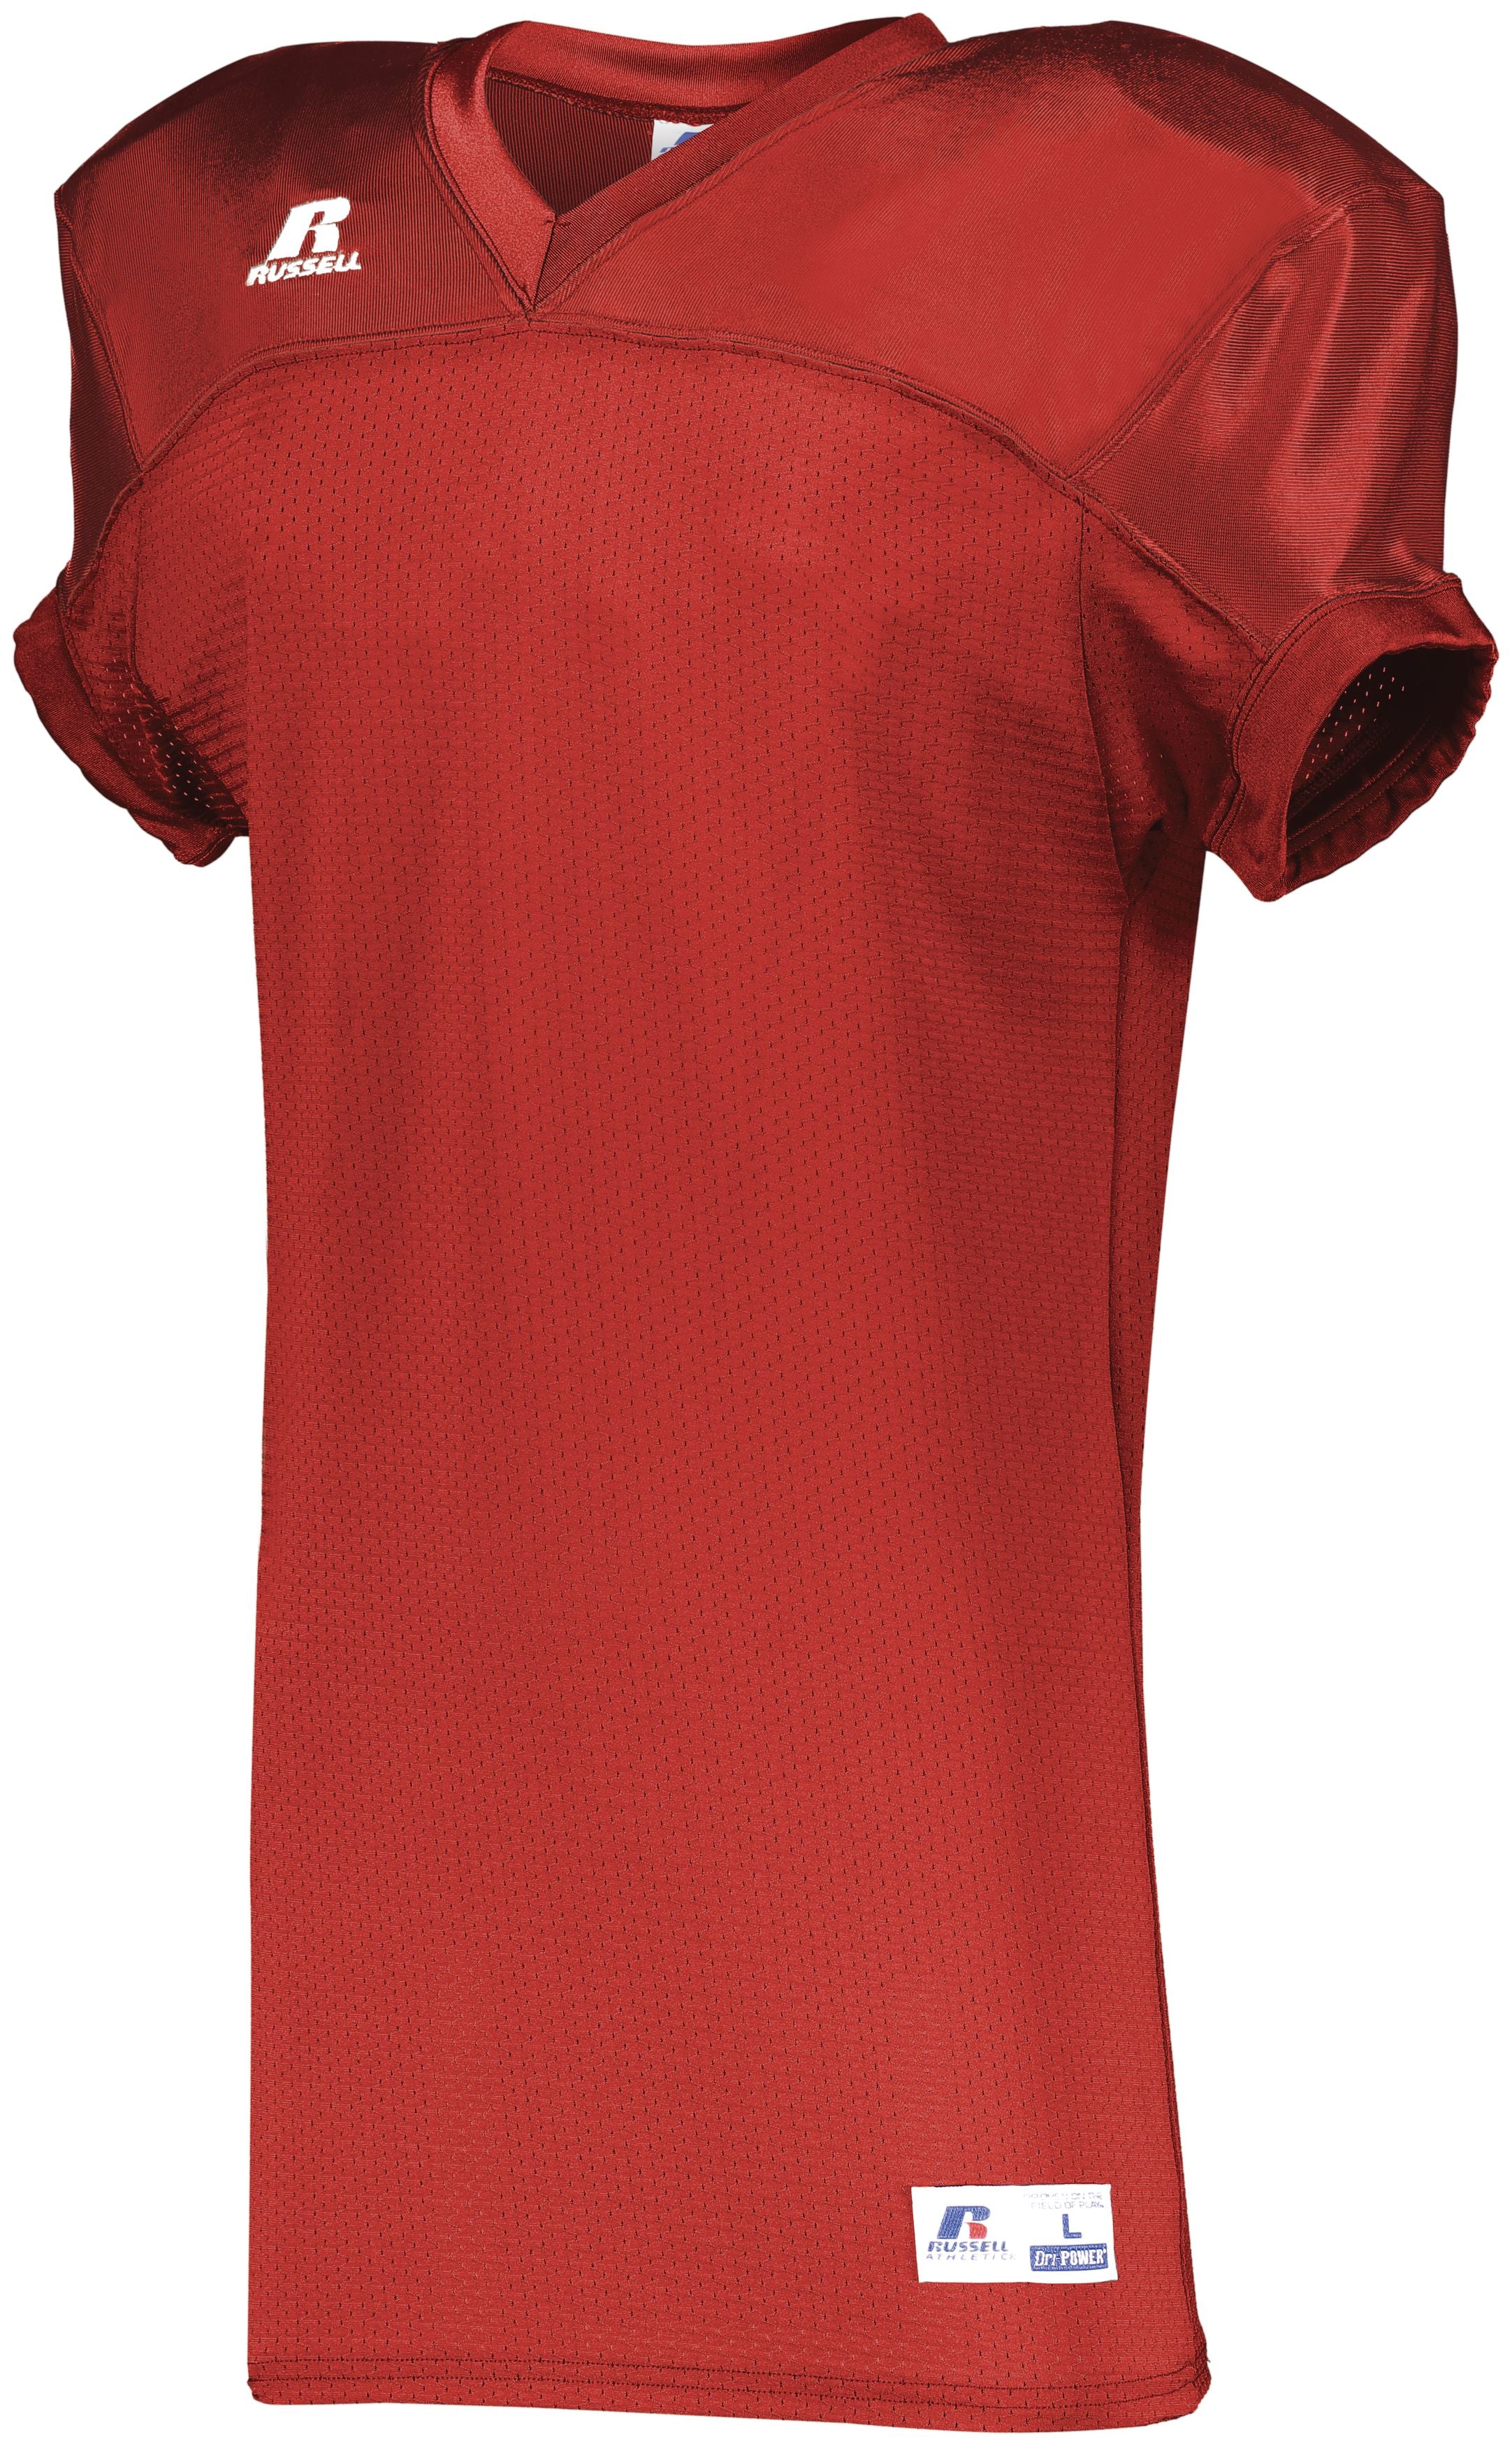 Russell Athletic Stretch Mesh Game Jersey in True Red  -Part of the Adult, Adult-Jersey, Football, Russell-Athletic-Products, Shirts, All-Sports, All-Sports-1 product lines at KanaleyCreations.com